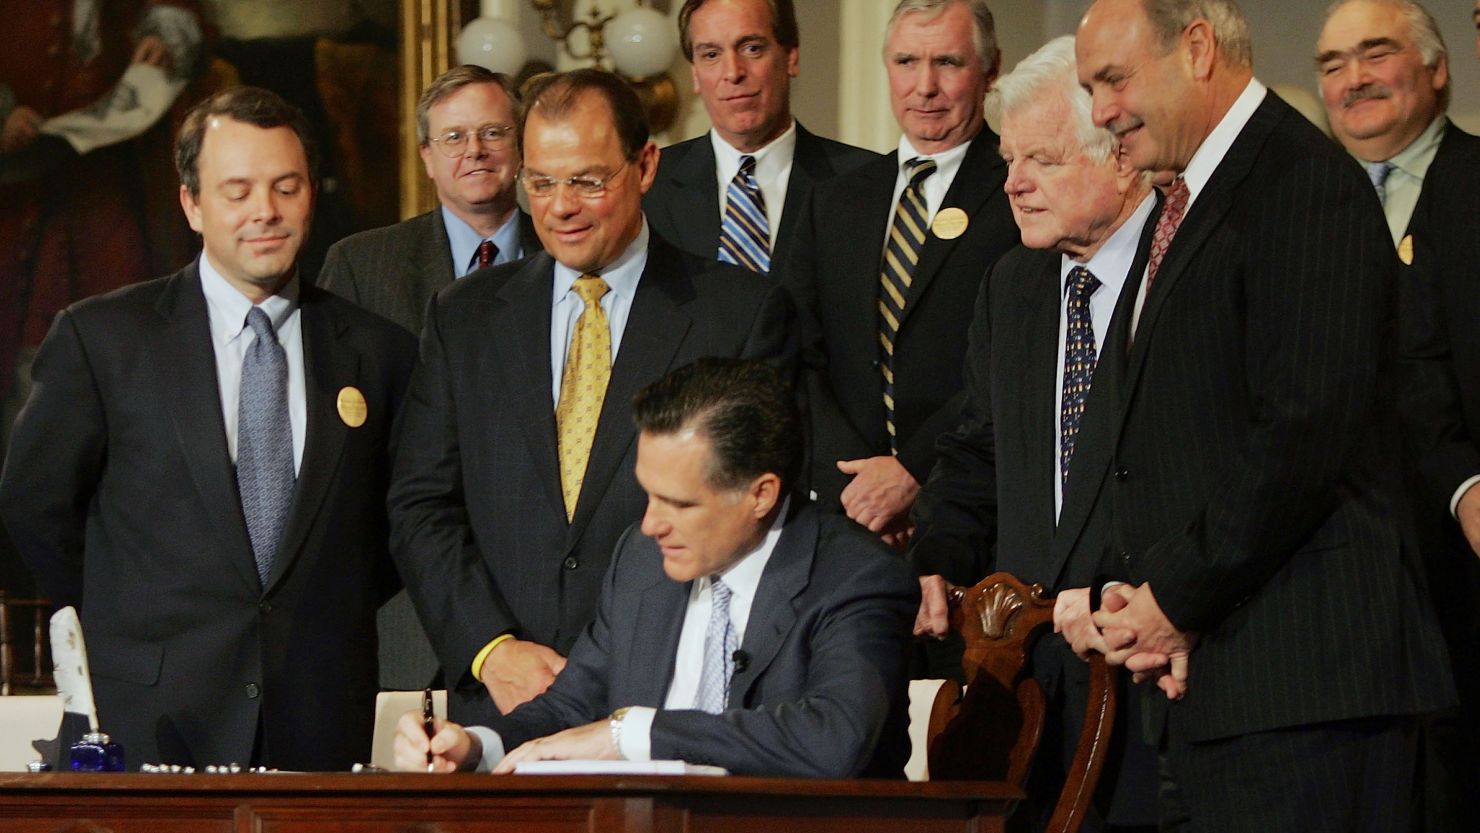 Gov. Mitt Romney signs into law a health care reform bill during a ceremony at Faneuil Hall on April 12, 2006, in Boston.